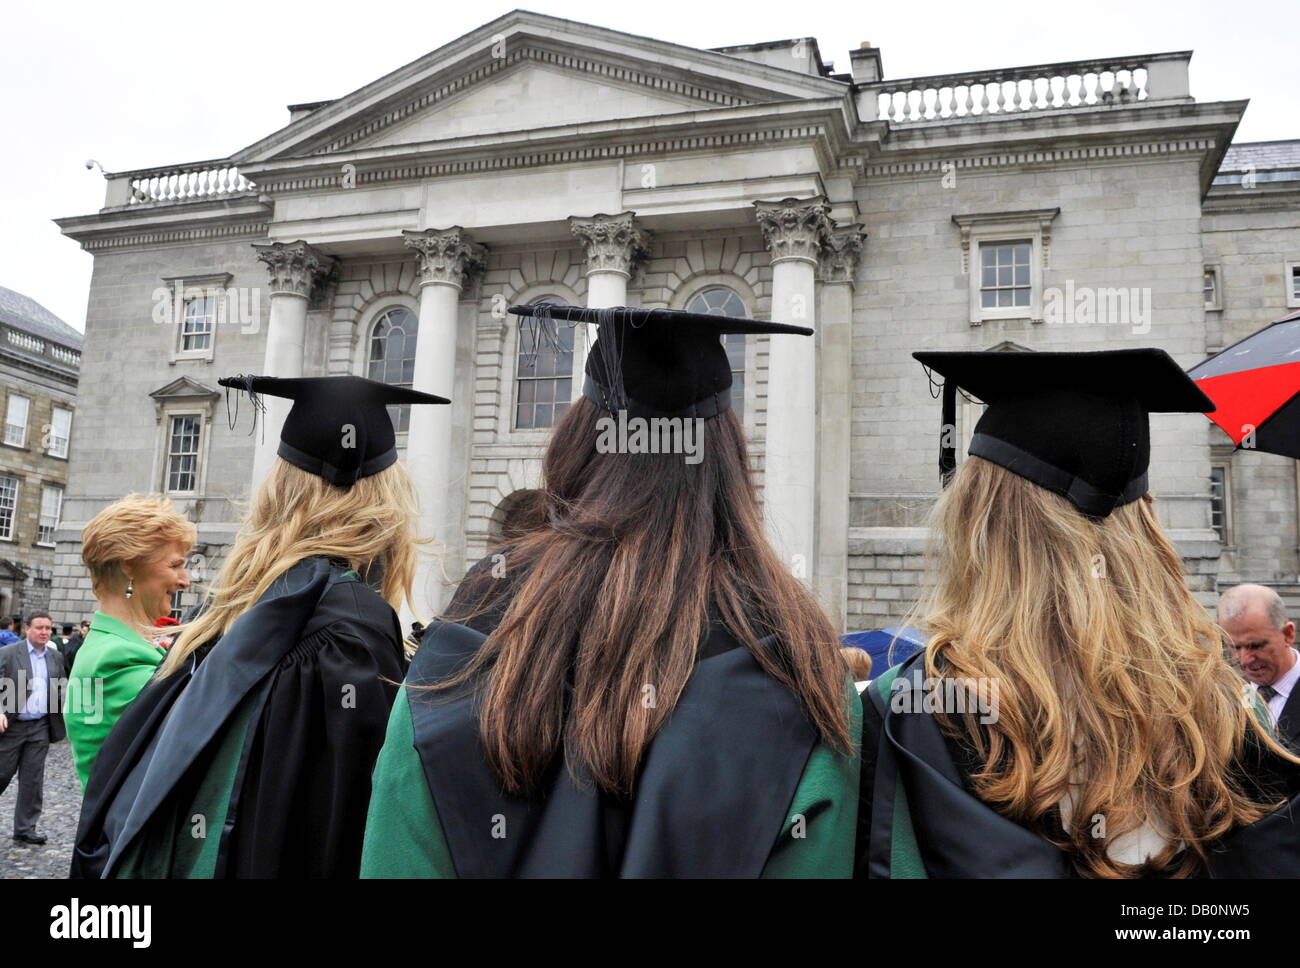 Graduates of Trinity College in Dublin pose for a photgrapher in front of a College building in Dublin, on June27, 2013. Stock Photo